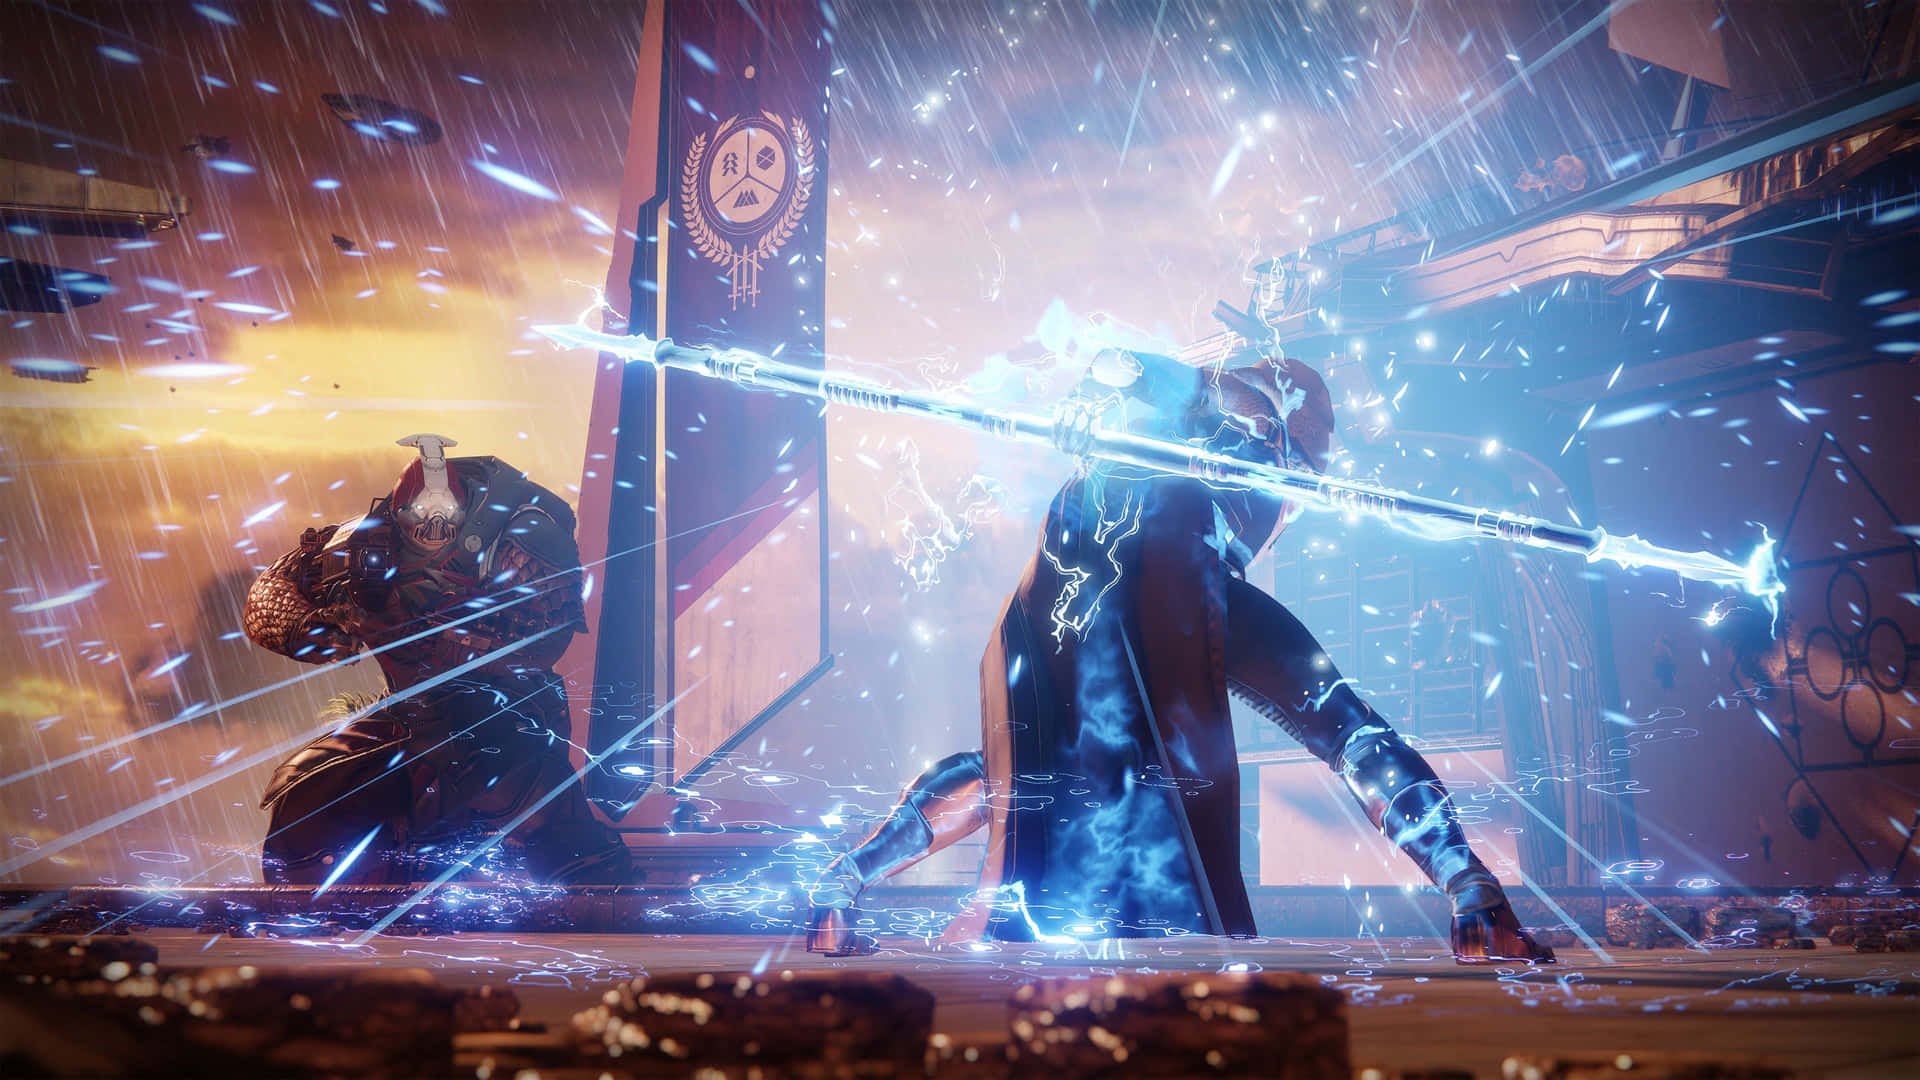 Rally your fireteam for an epic mission in Destiny 2 Wallpaper